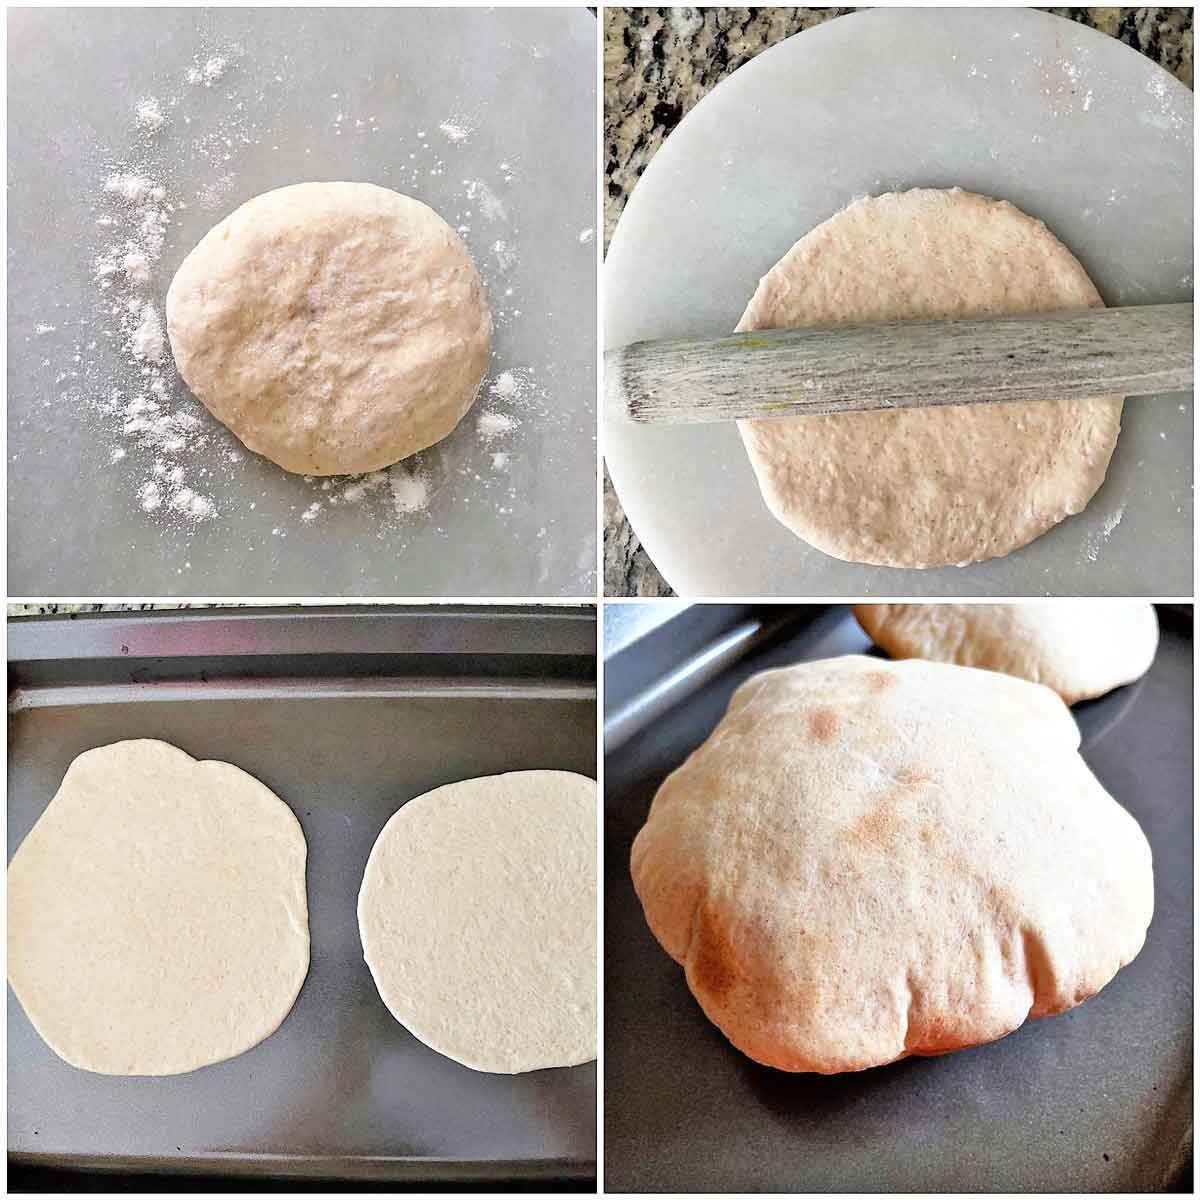 Pita bread rolling and baking.